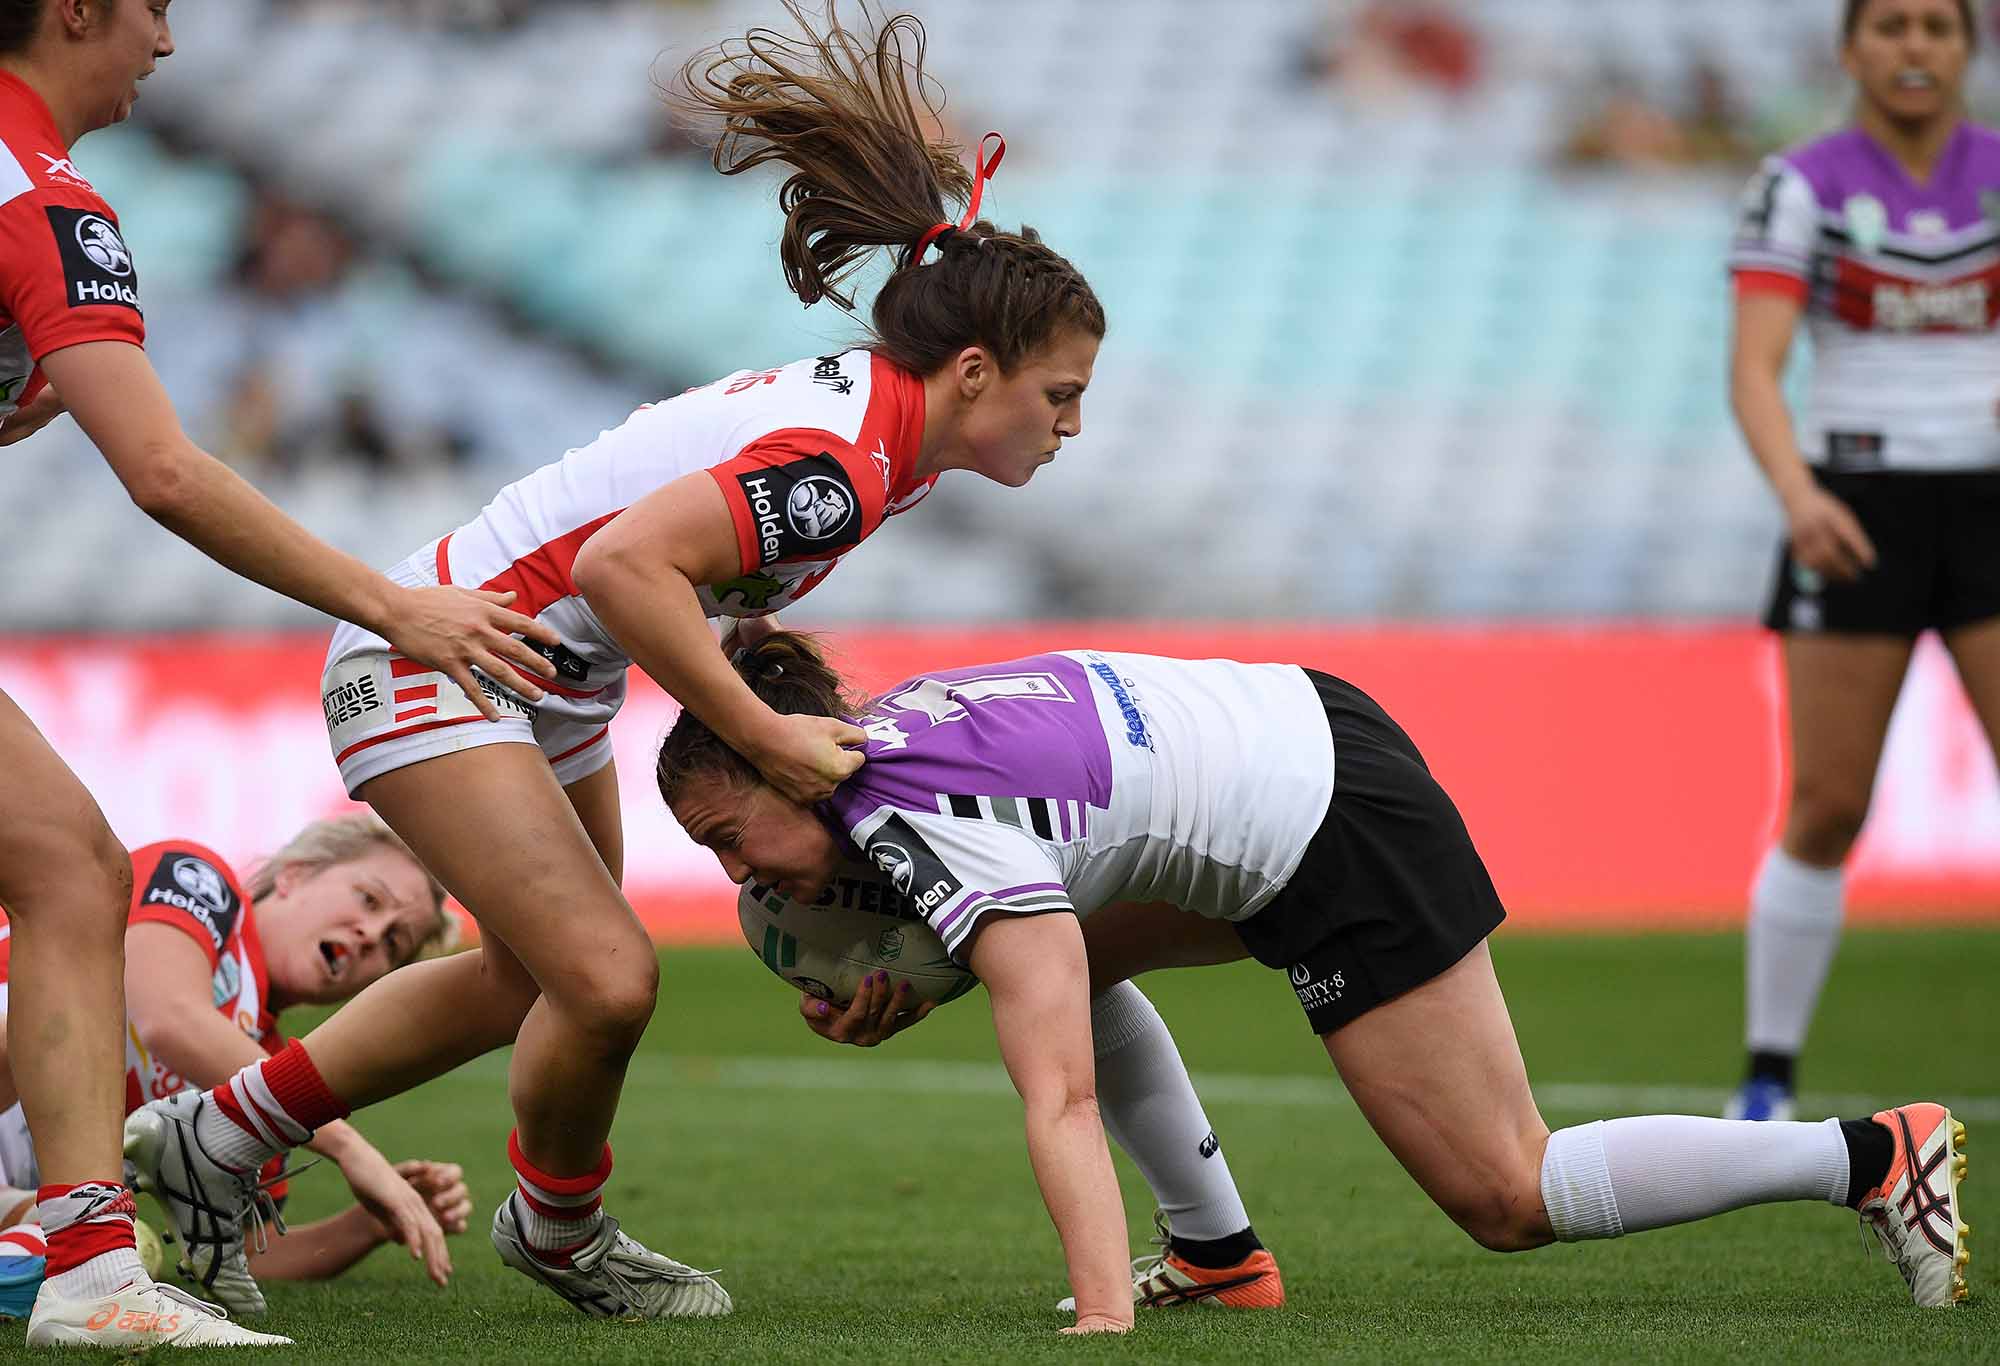 Jessica Sergis for the Dragons in the NRLW